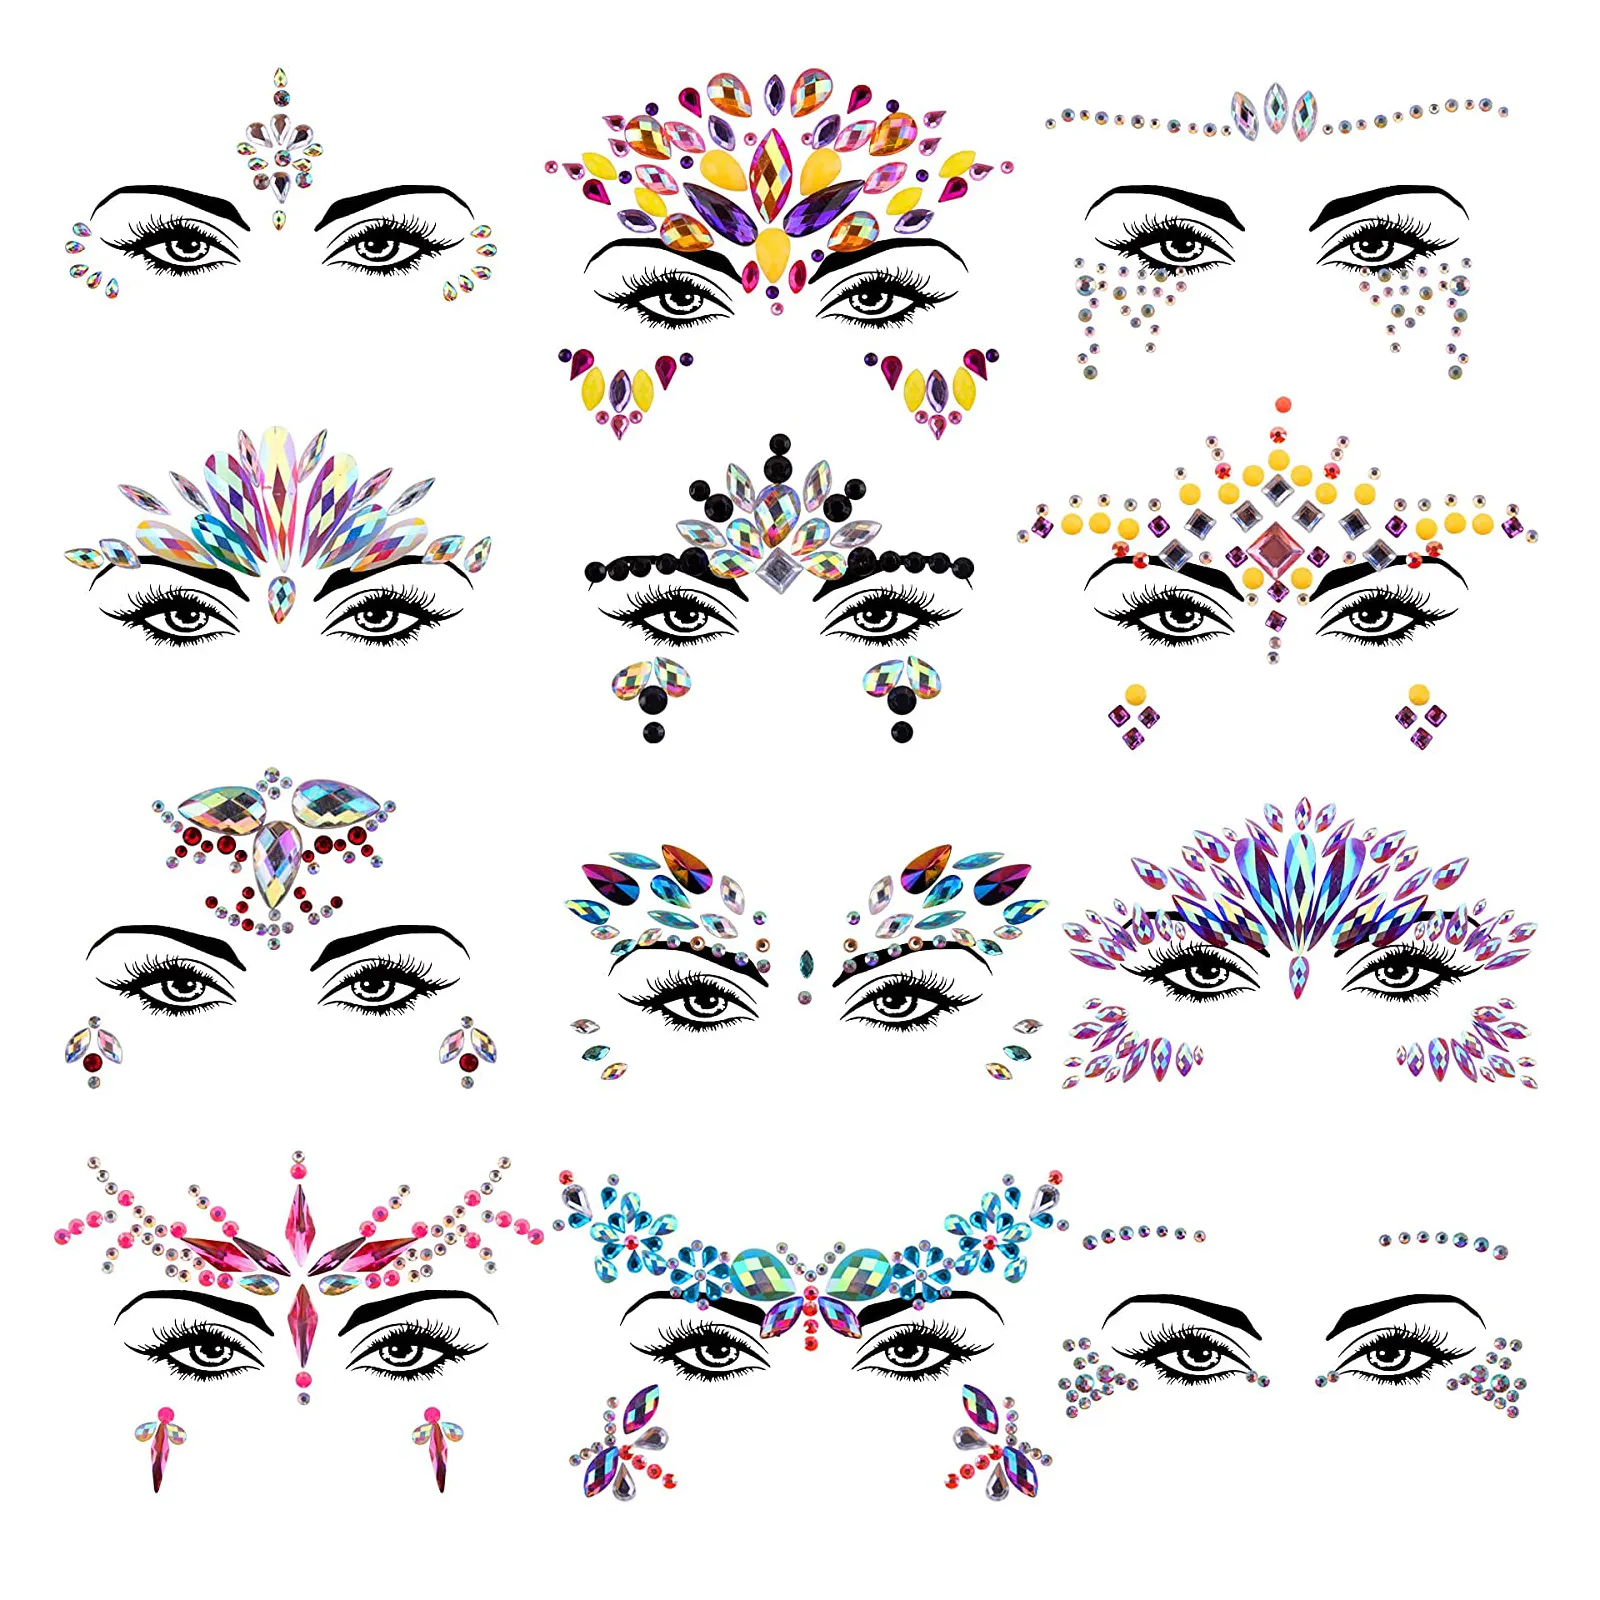 Face Gem Jewels Rave Face Crystal Gem Eye Face Body Jewel Crystal Rhinestone Stickers for Festival Party